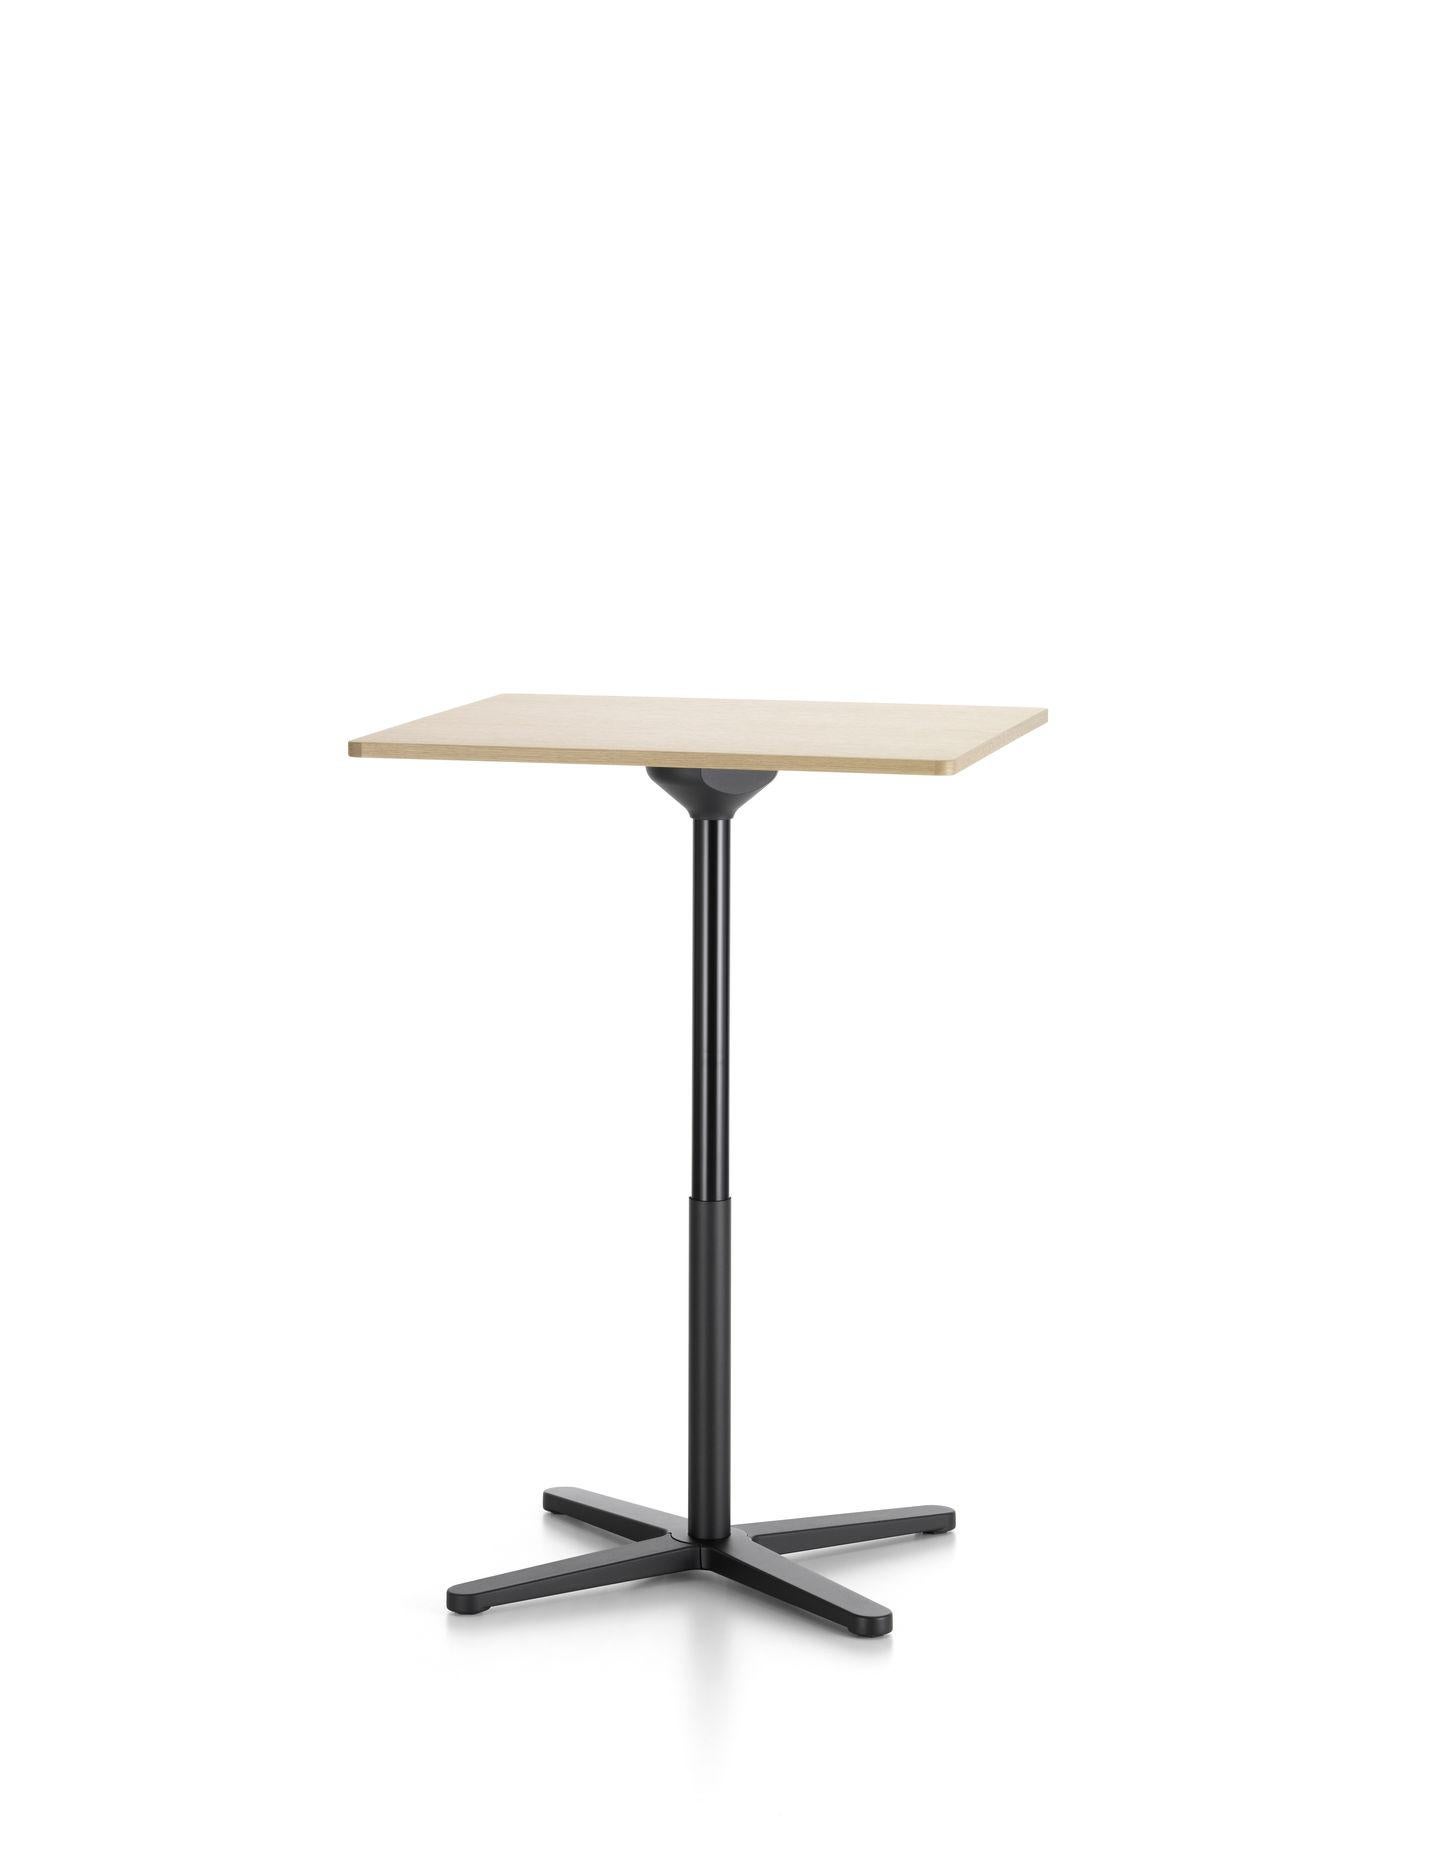 Mid-Century Modern Jasper Morrison Super Fold Table High, Wood and Steel by Vitra